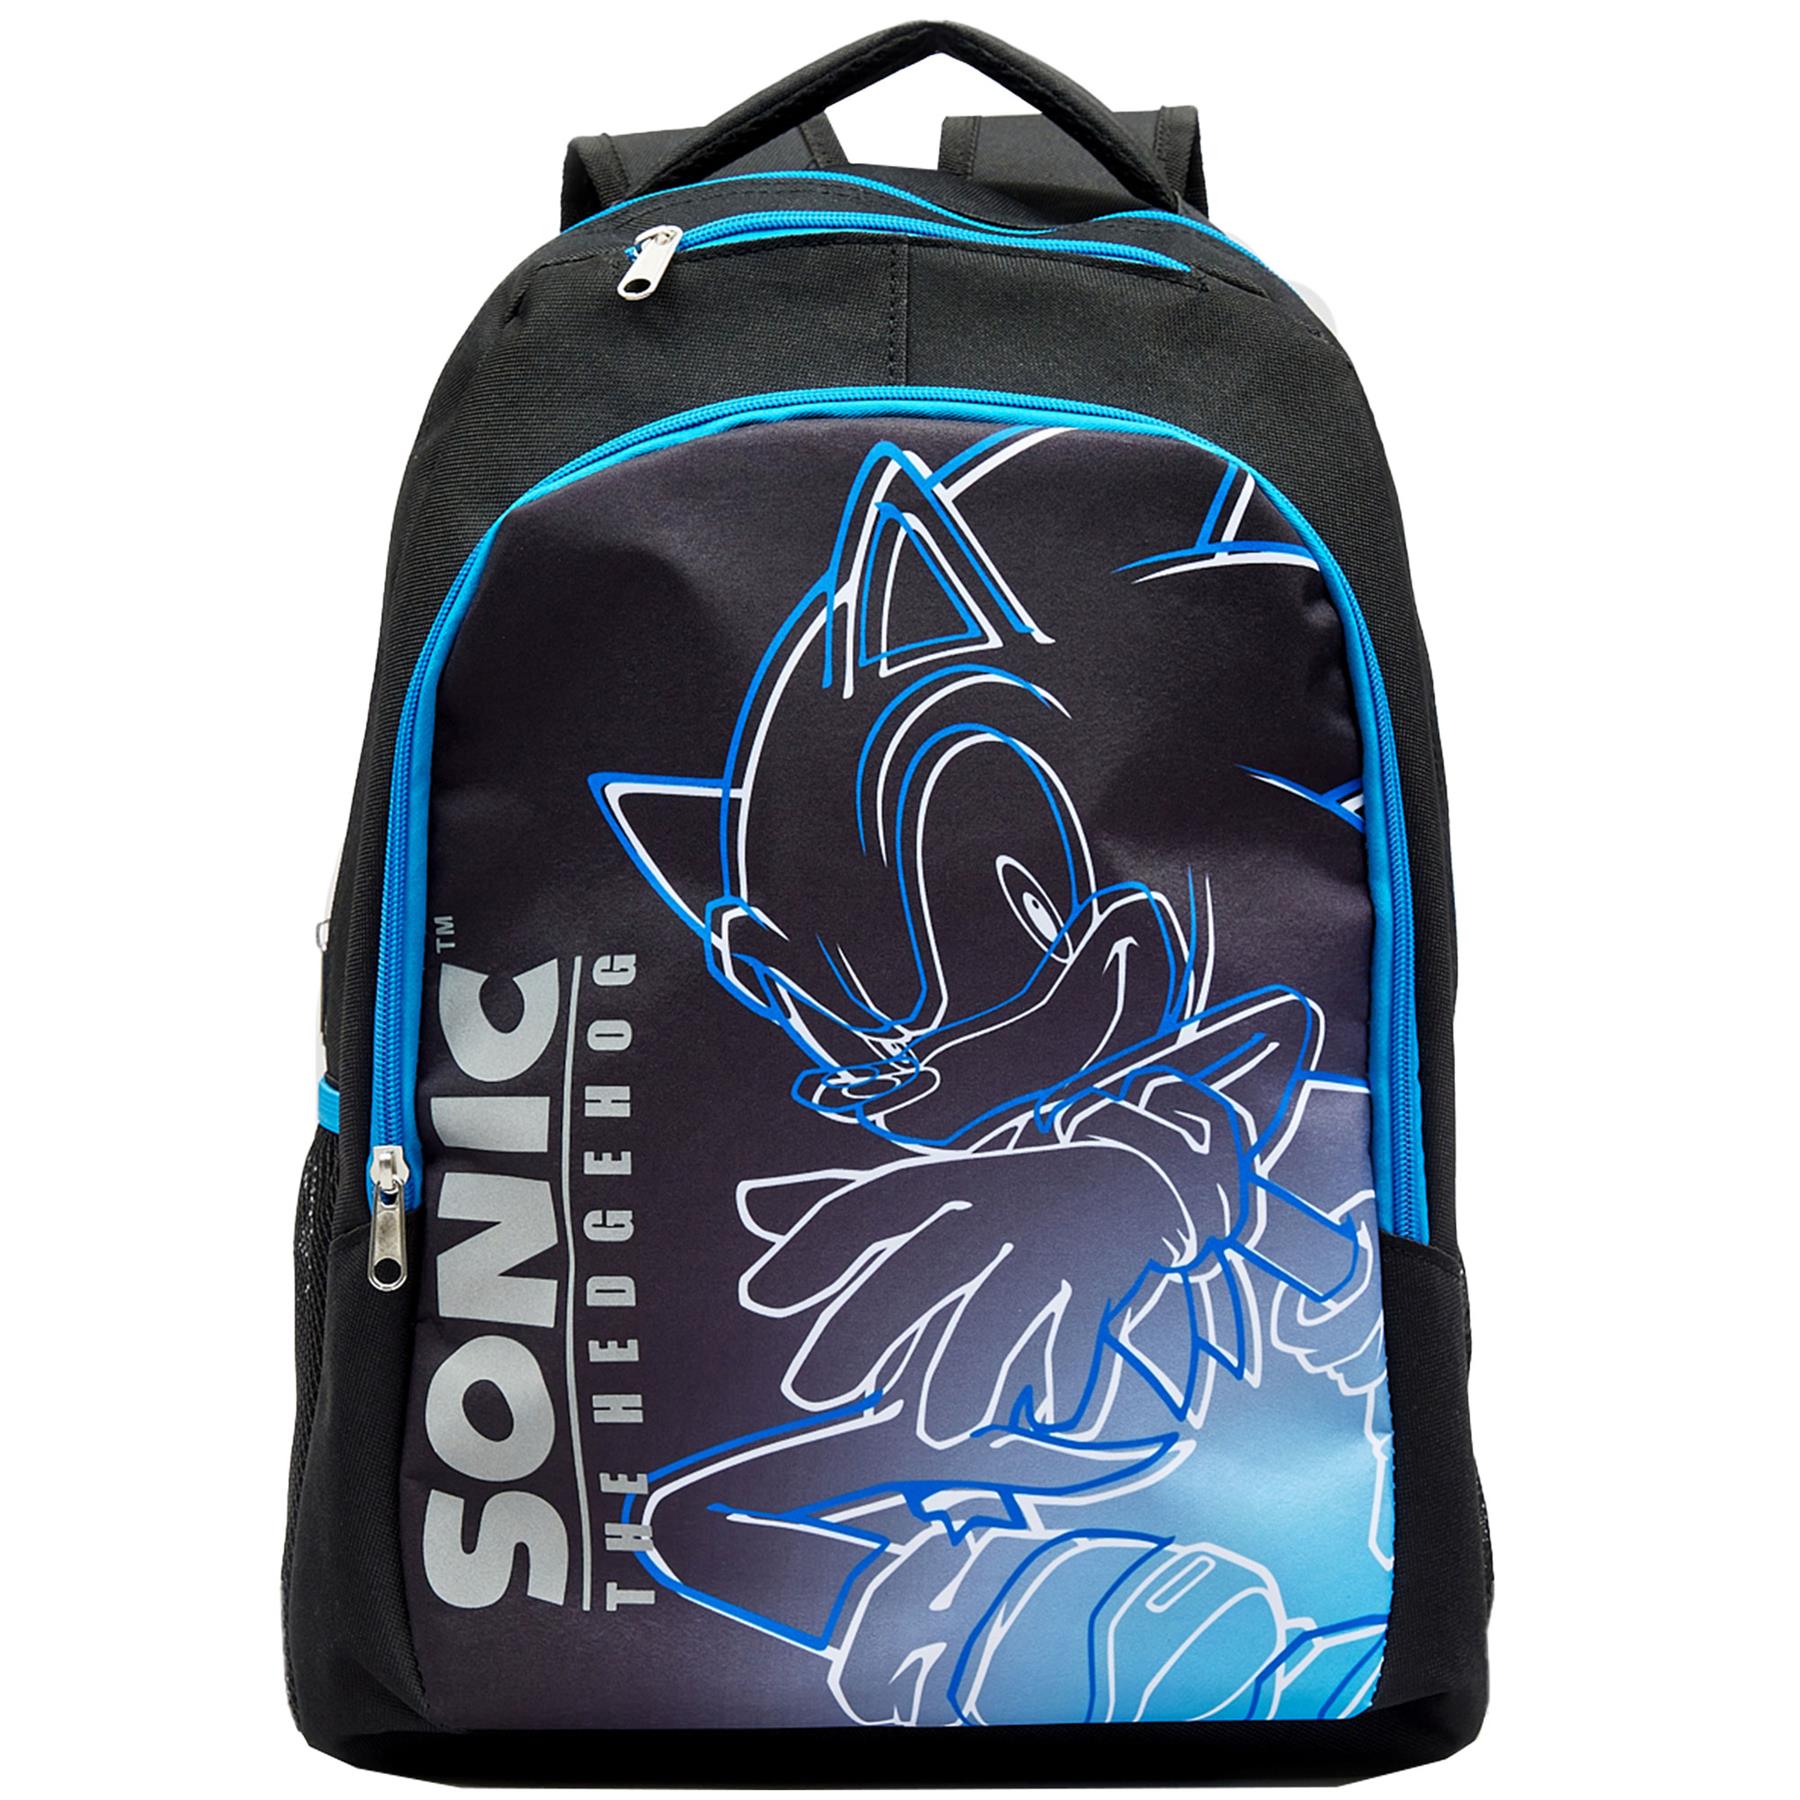 Kids Officially Licensed Sonic The Hedgehog Backpack Amazing School Travel Bag